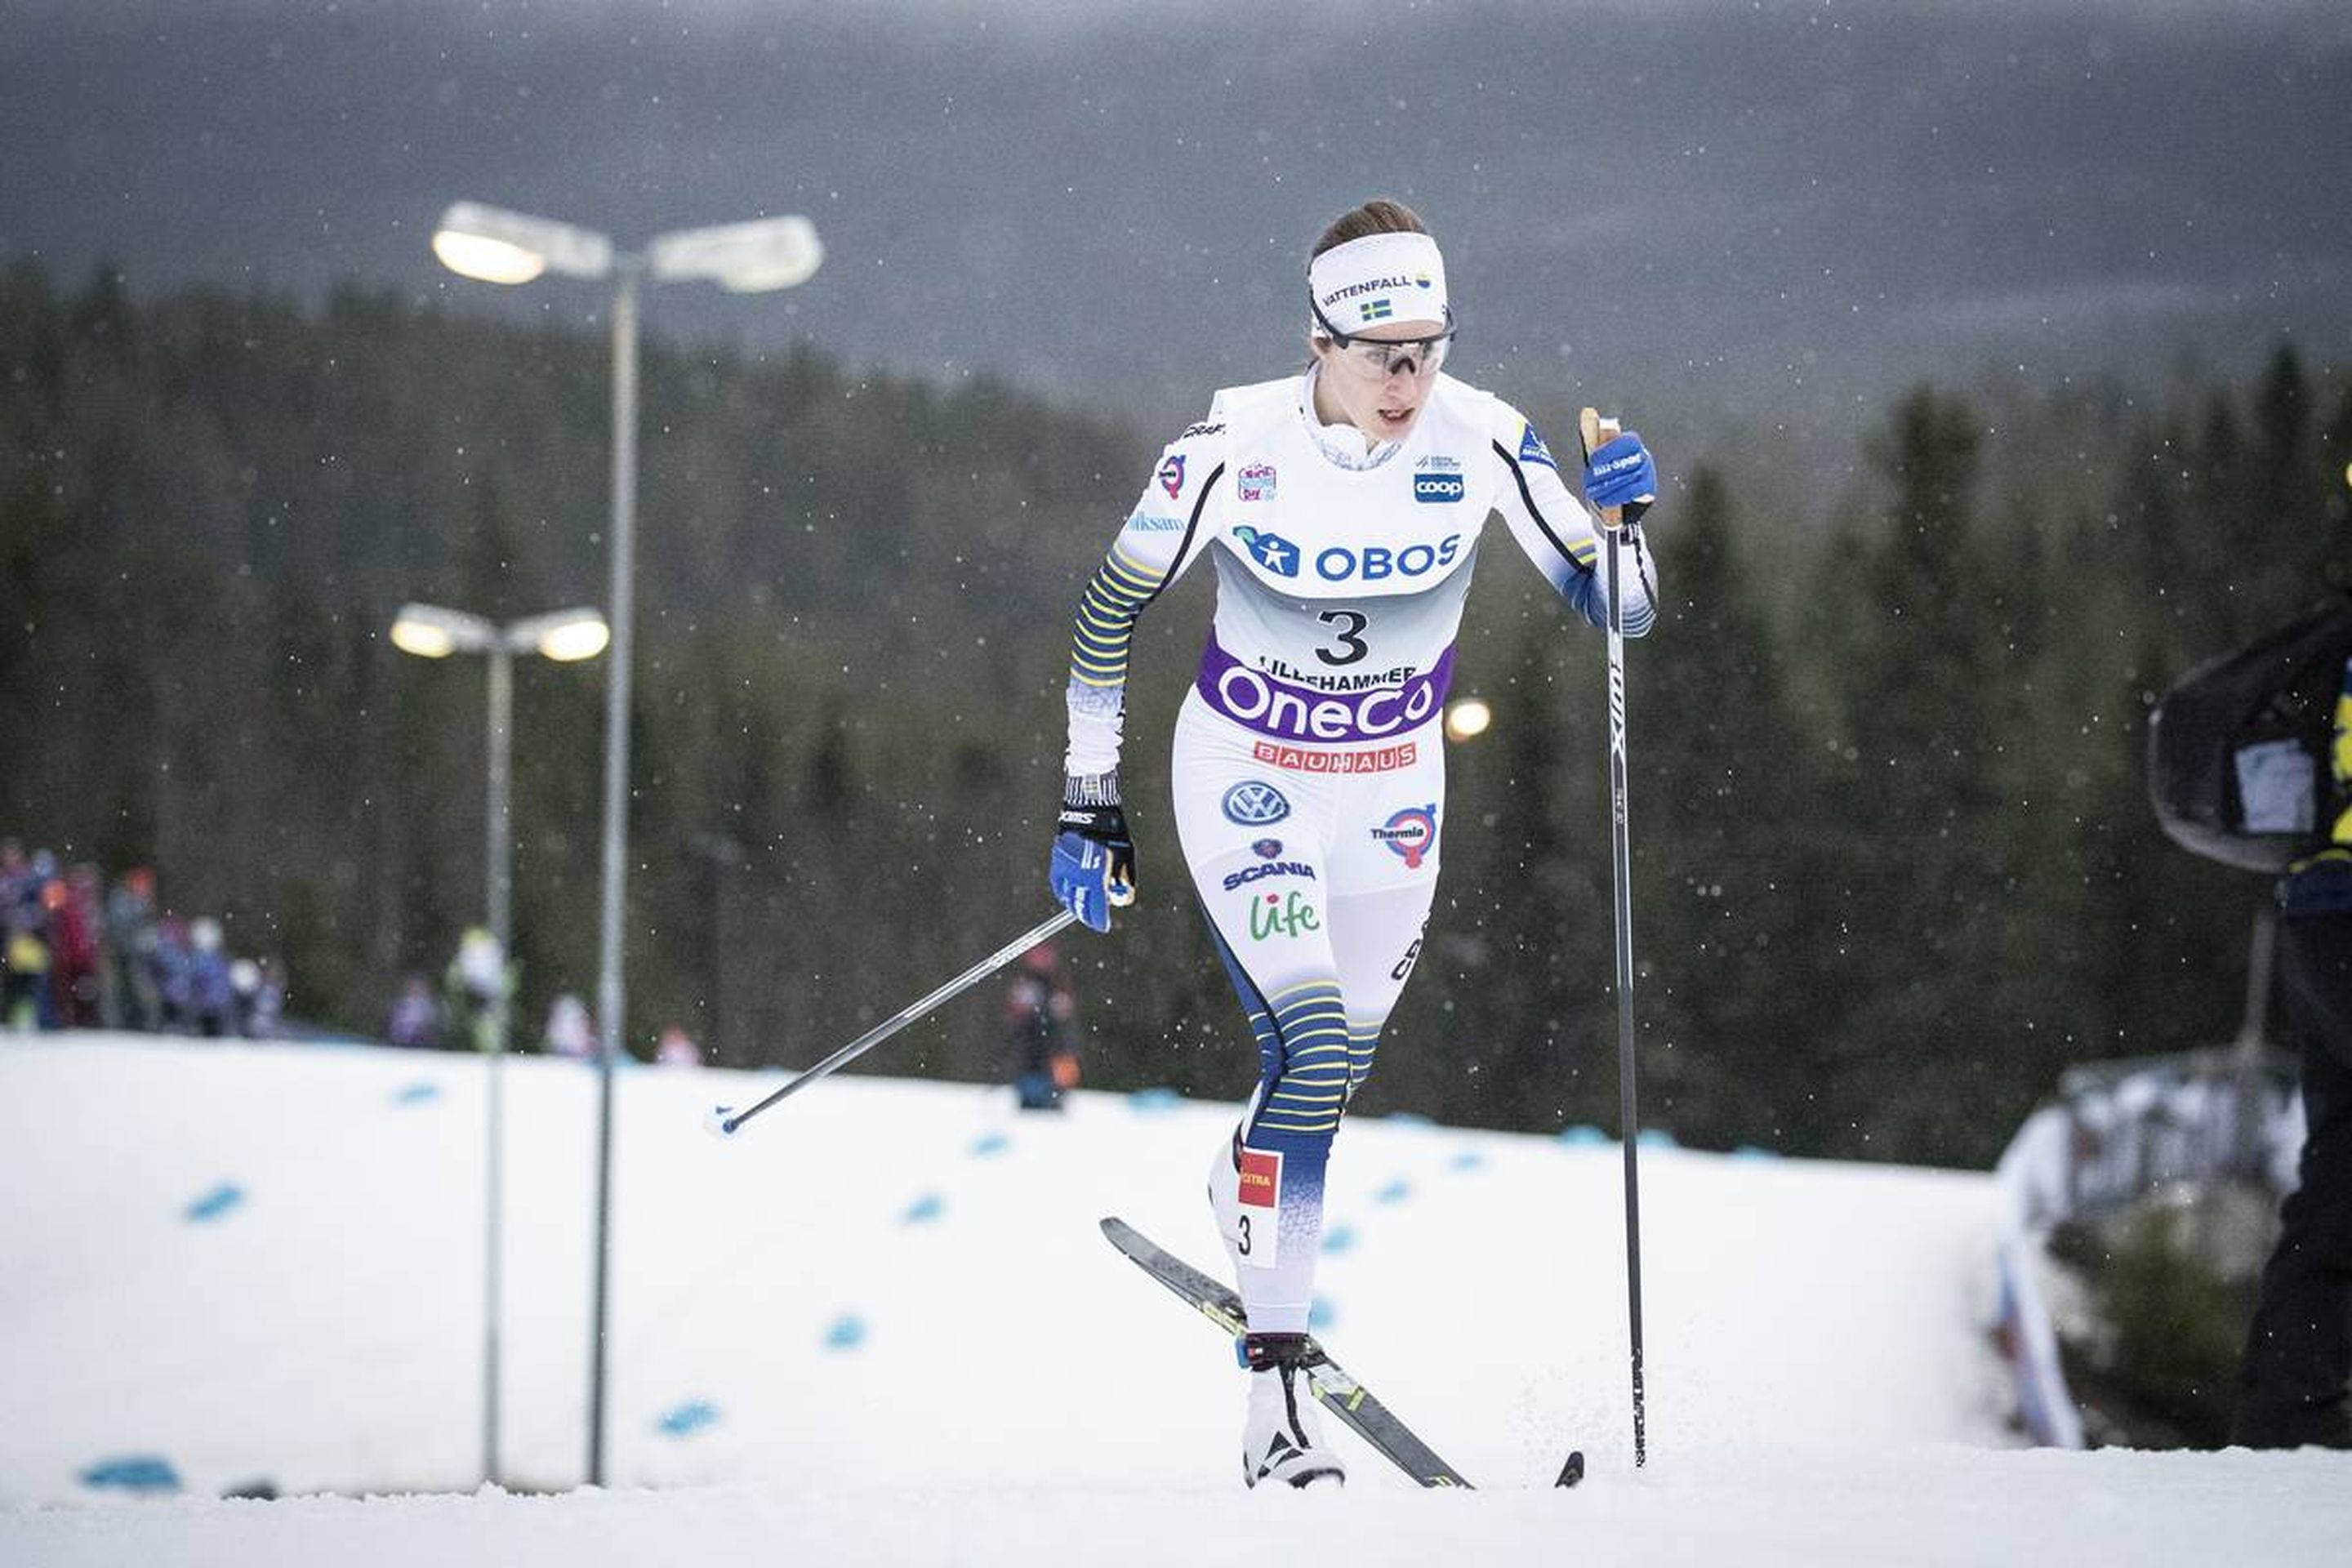 A strong performance by young Swedish athlete Ebba Andersson